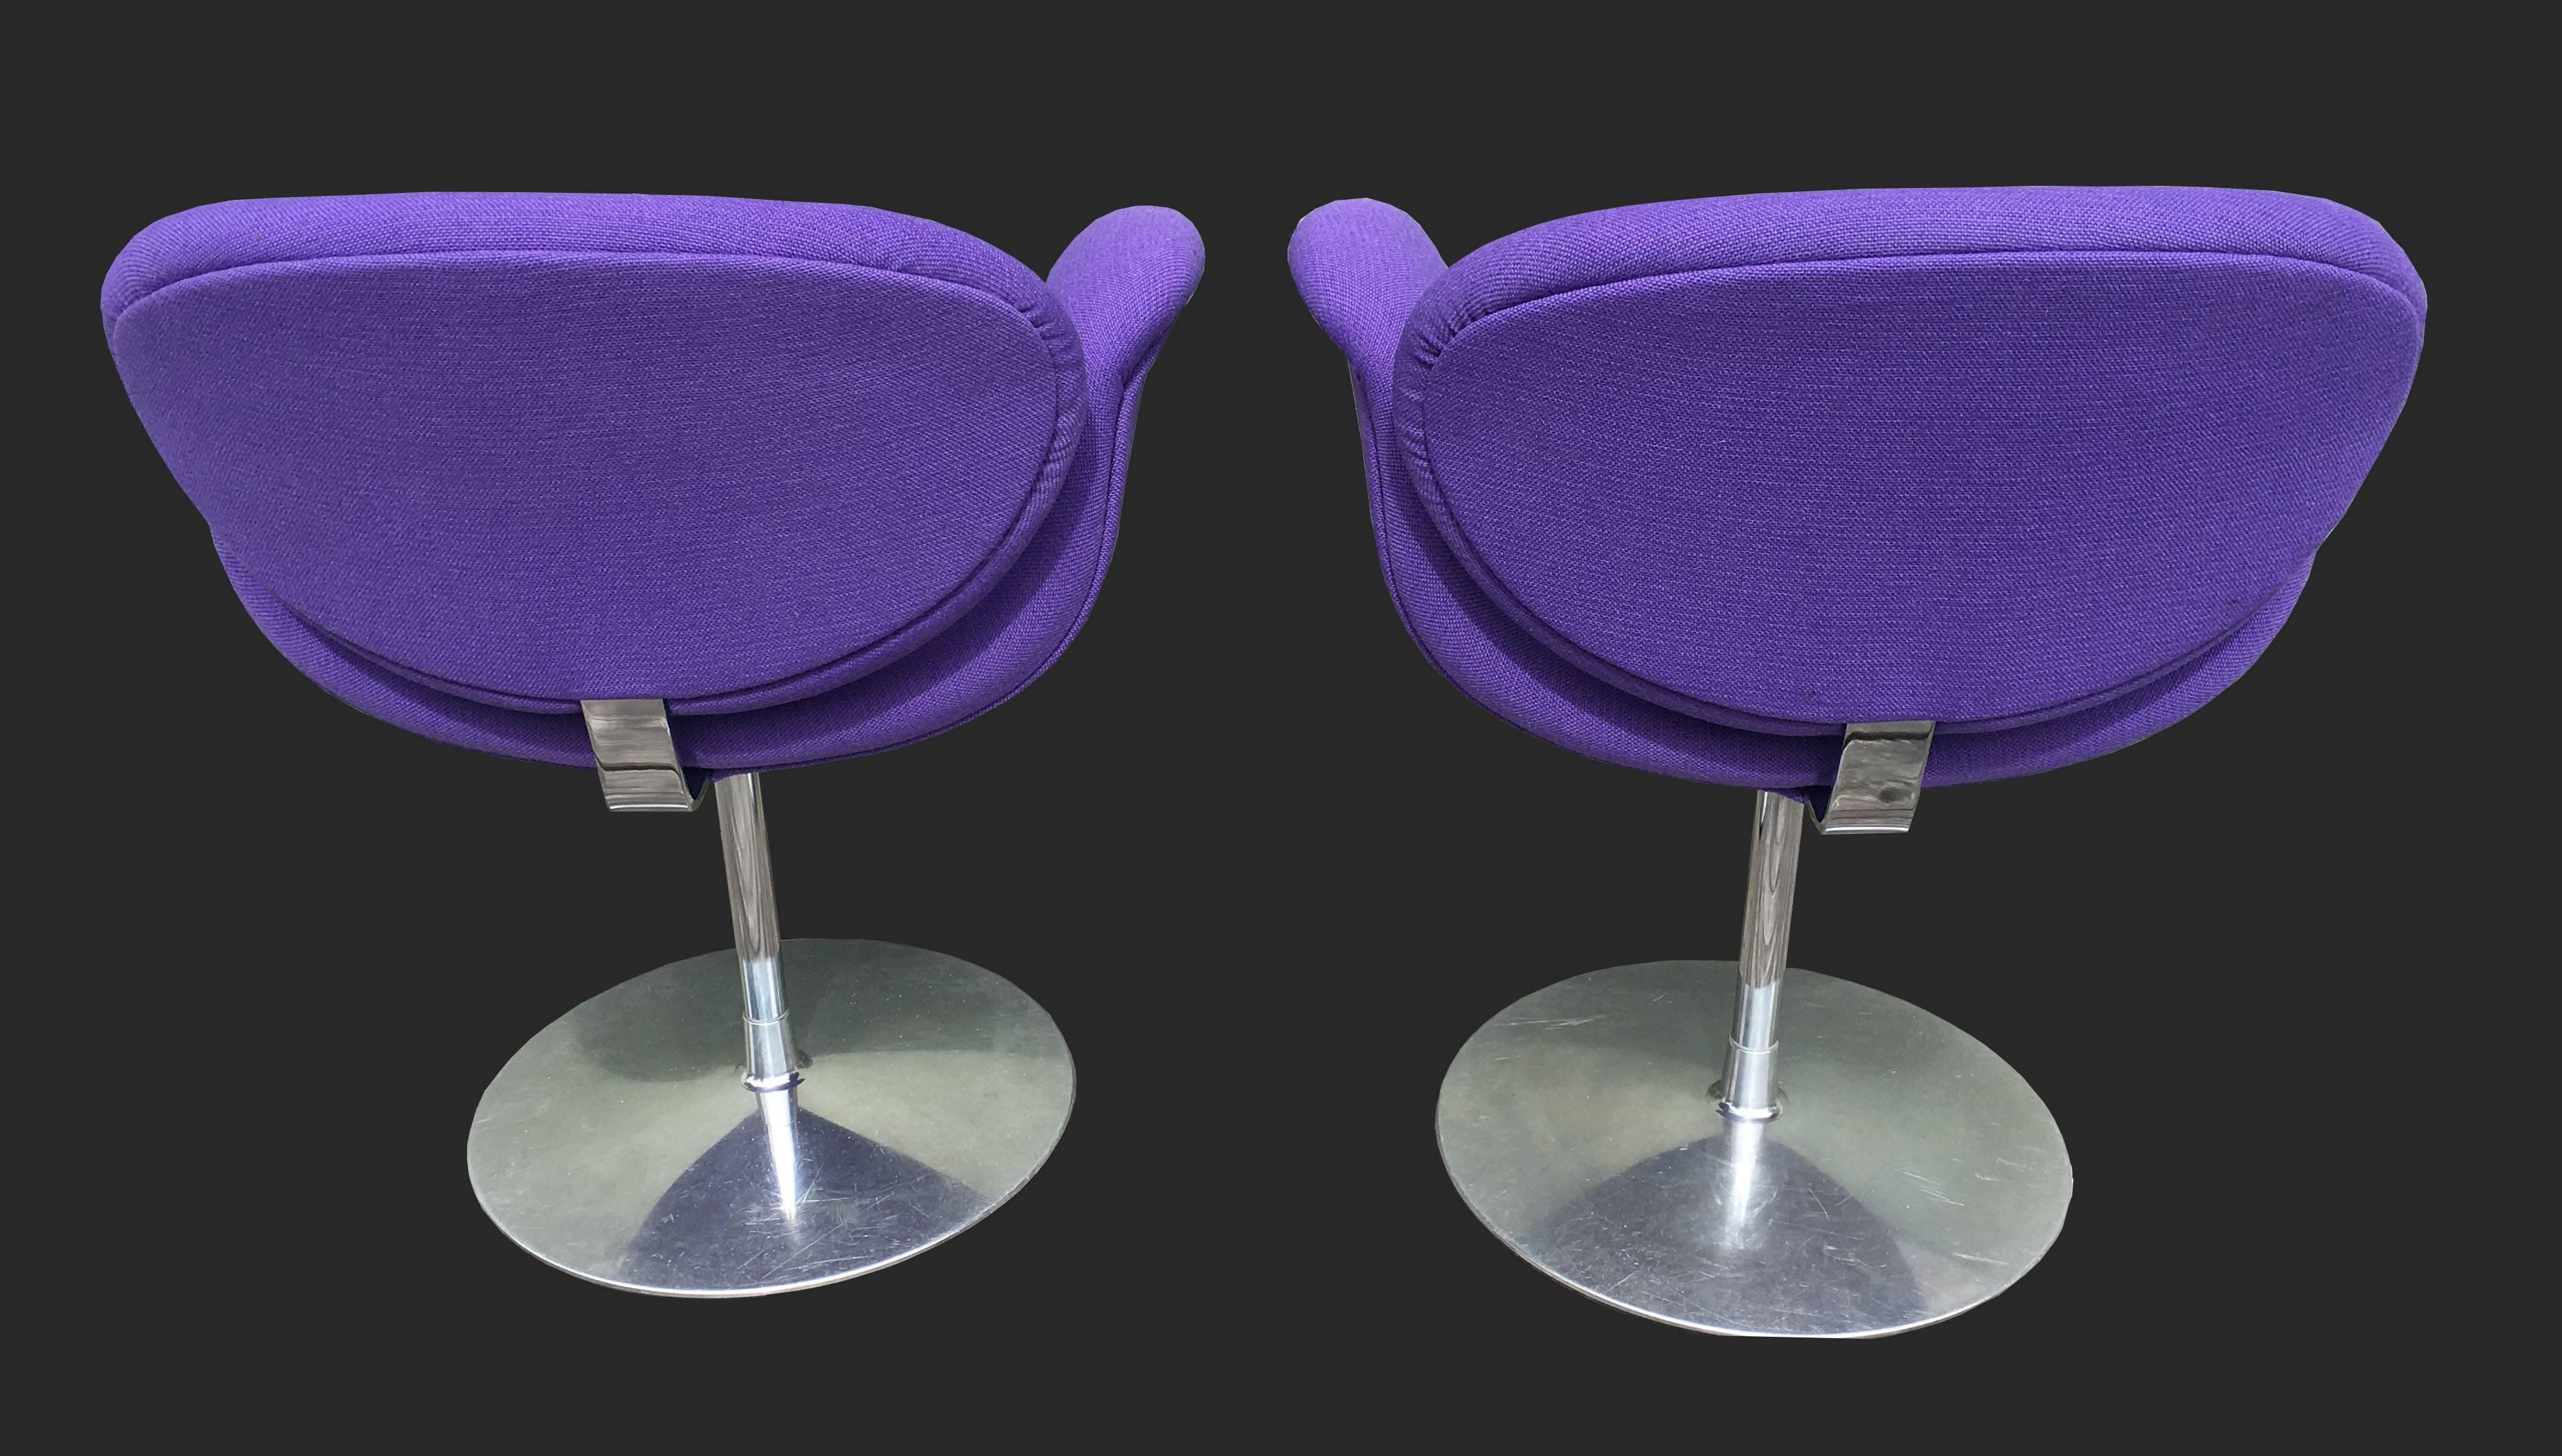 A very good original pair of chairs, in great condition, and freshly reupholstered in purple wool fabric.